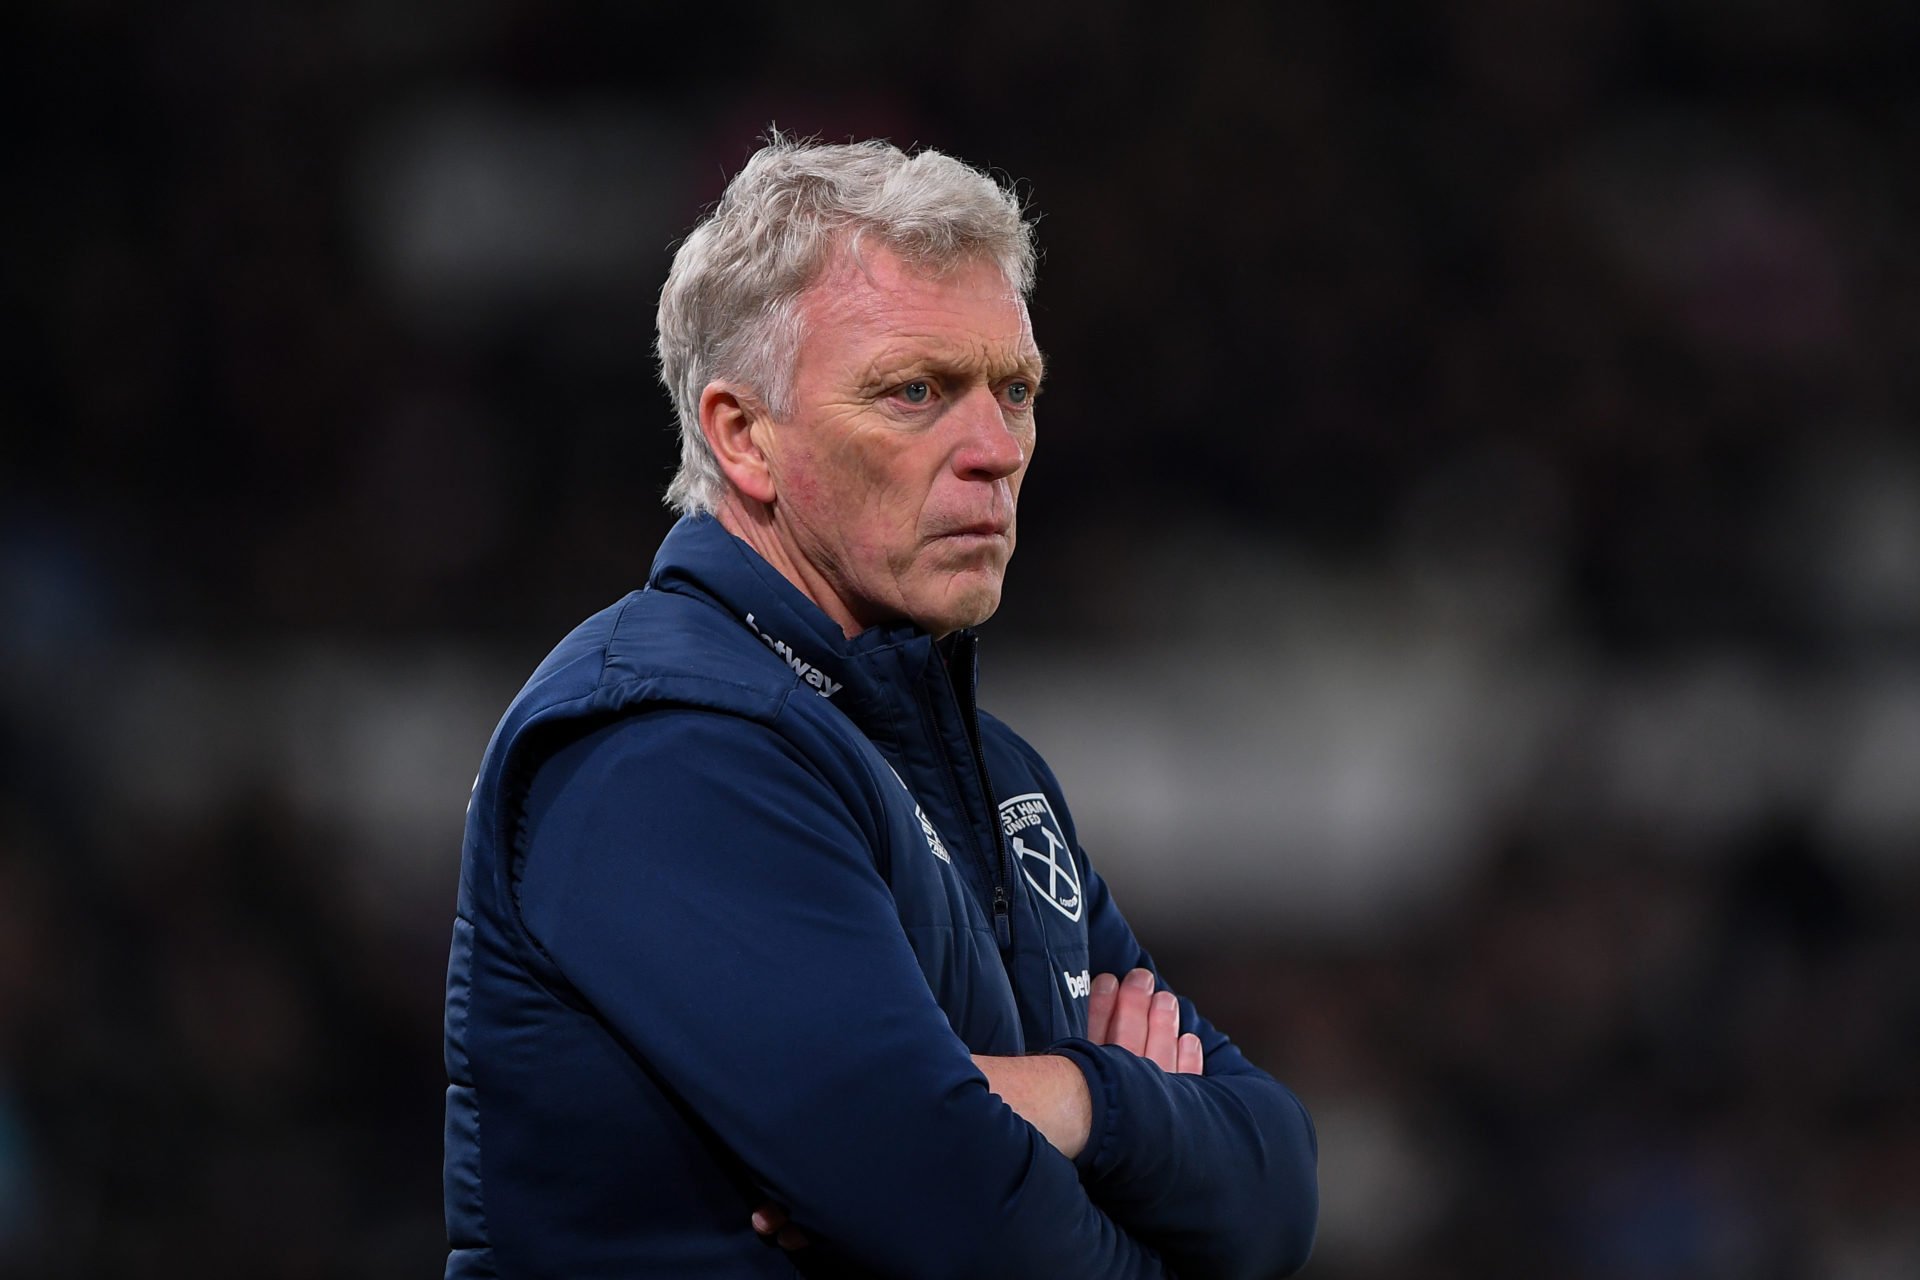 Moyes target says he’s ‘delighted’ he didn’t move to West Ham on deadline day